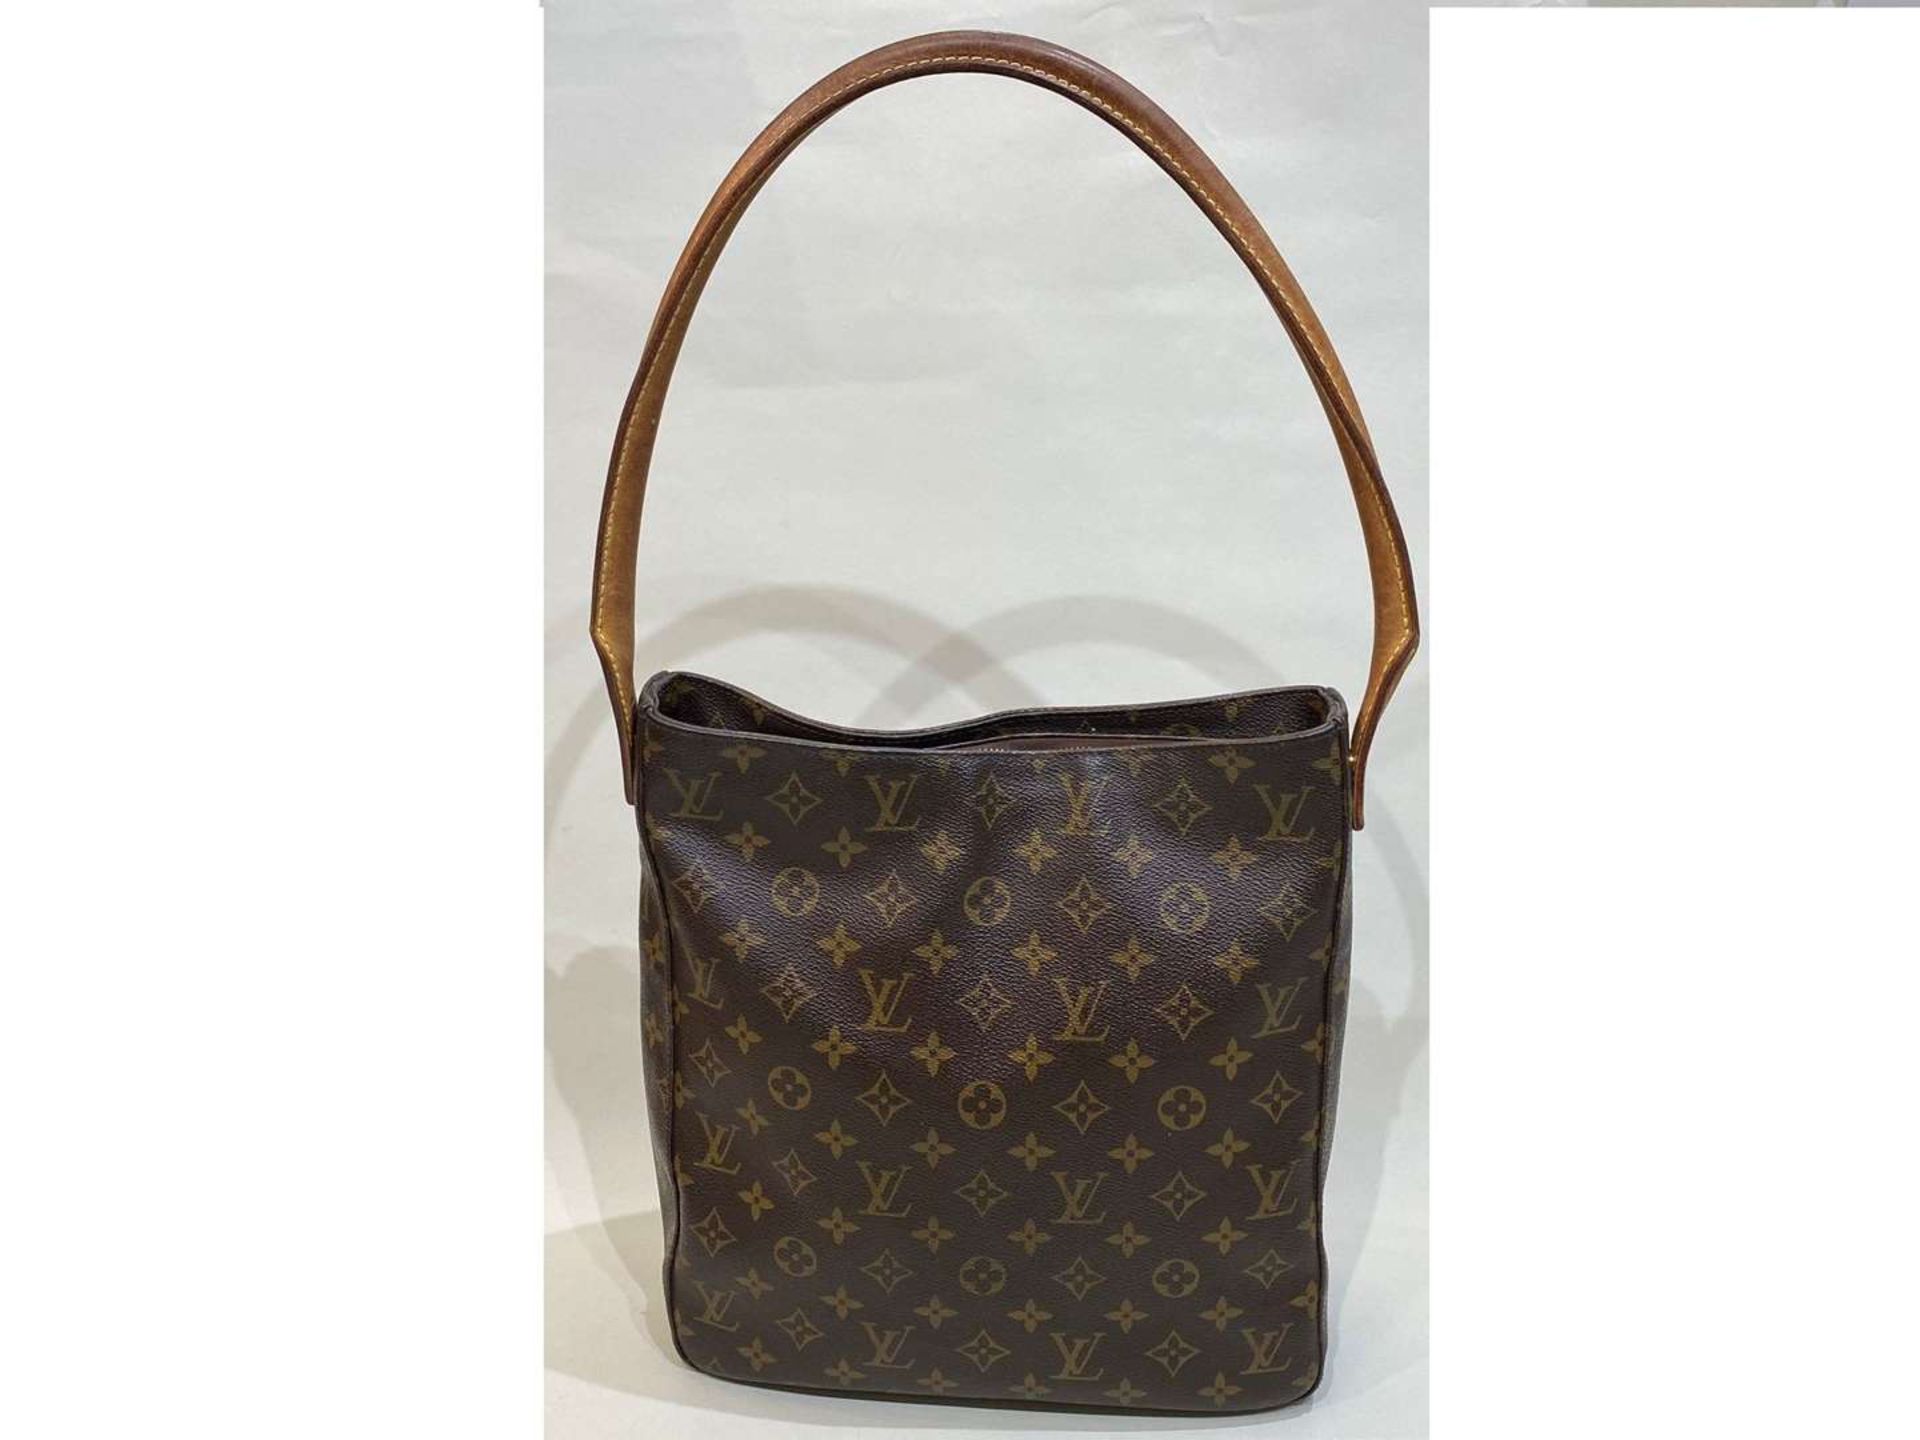 LOUIS VUITTON, Looping, tan stitched leather and monogrammed shoulder bag - Image 2 of 7